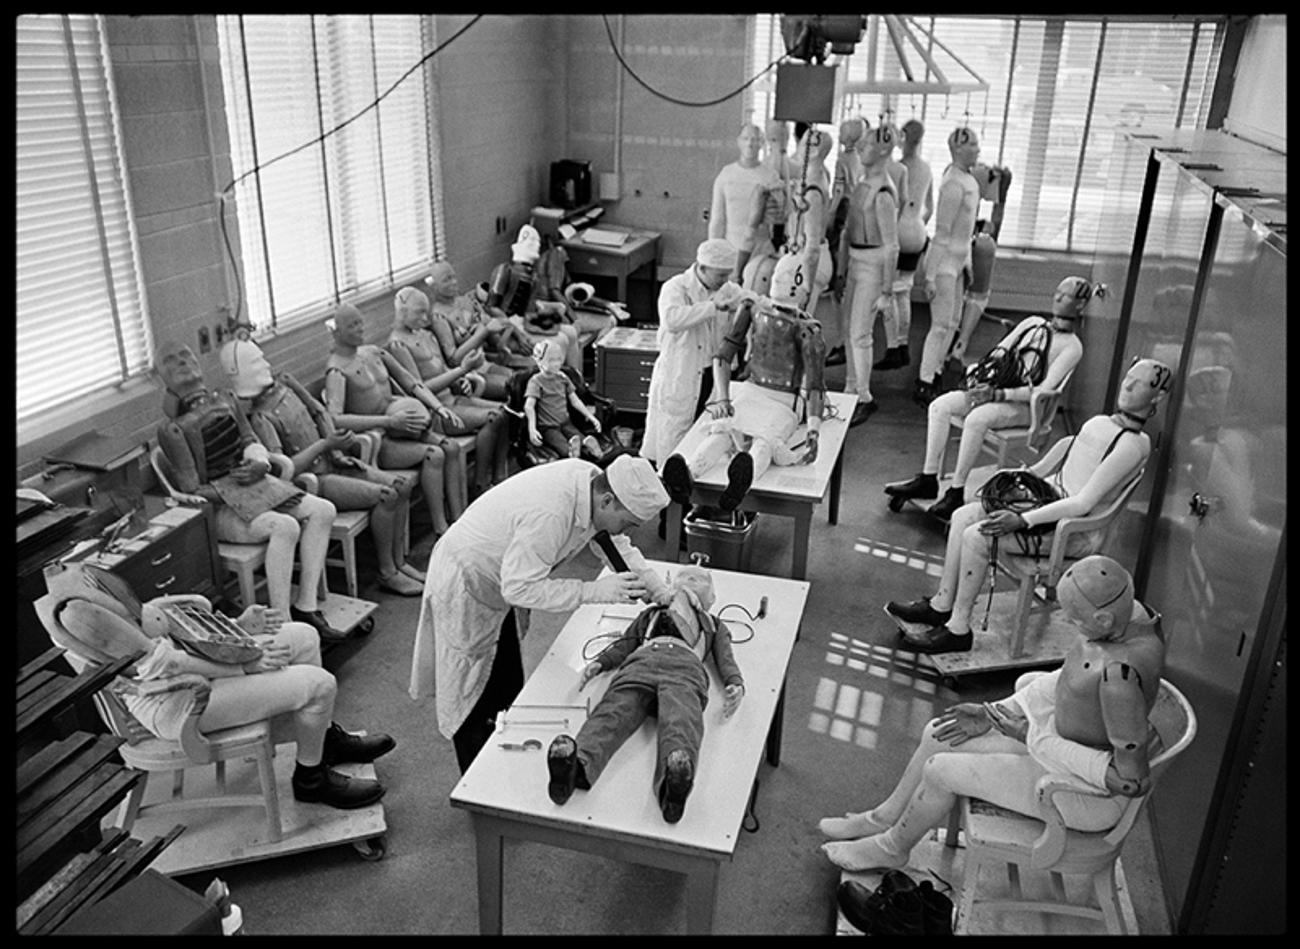 Crash Test Dummies 

by Arthur Steel

Crash Test Dummies – General Motors dummy hospital, Detroit, 1969 

All prints are hand signed limited editions, no further prints are produced once sold.

paper size - 54 x 41.5 " / 137 x 105 cm 
signed and